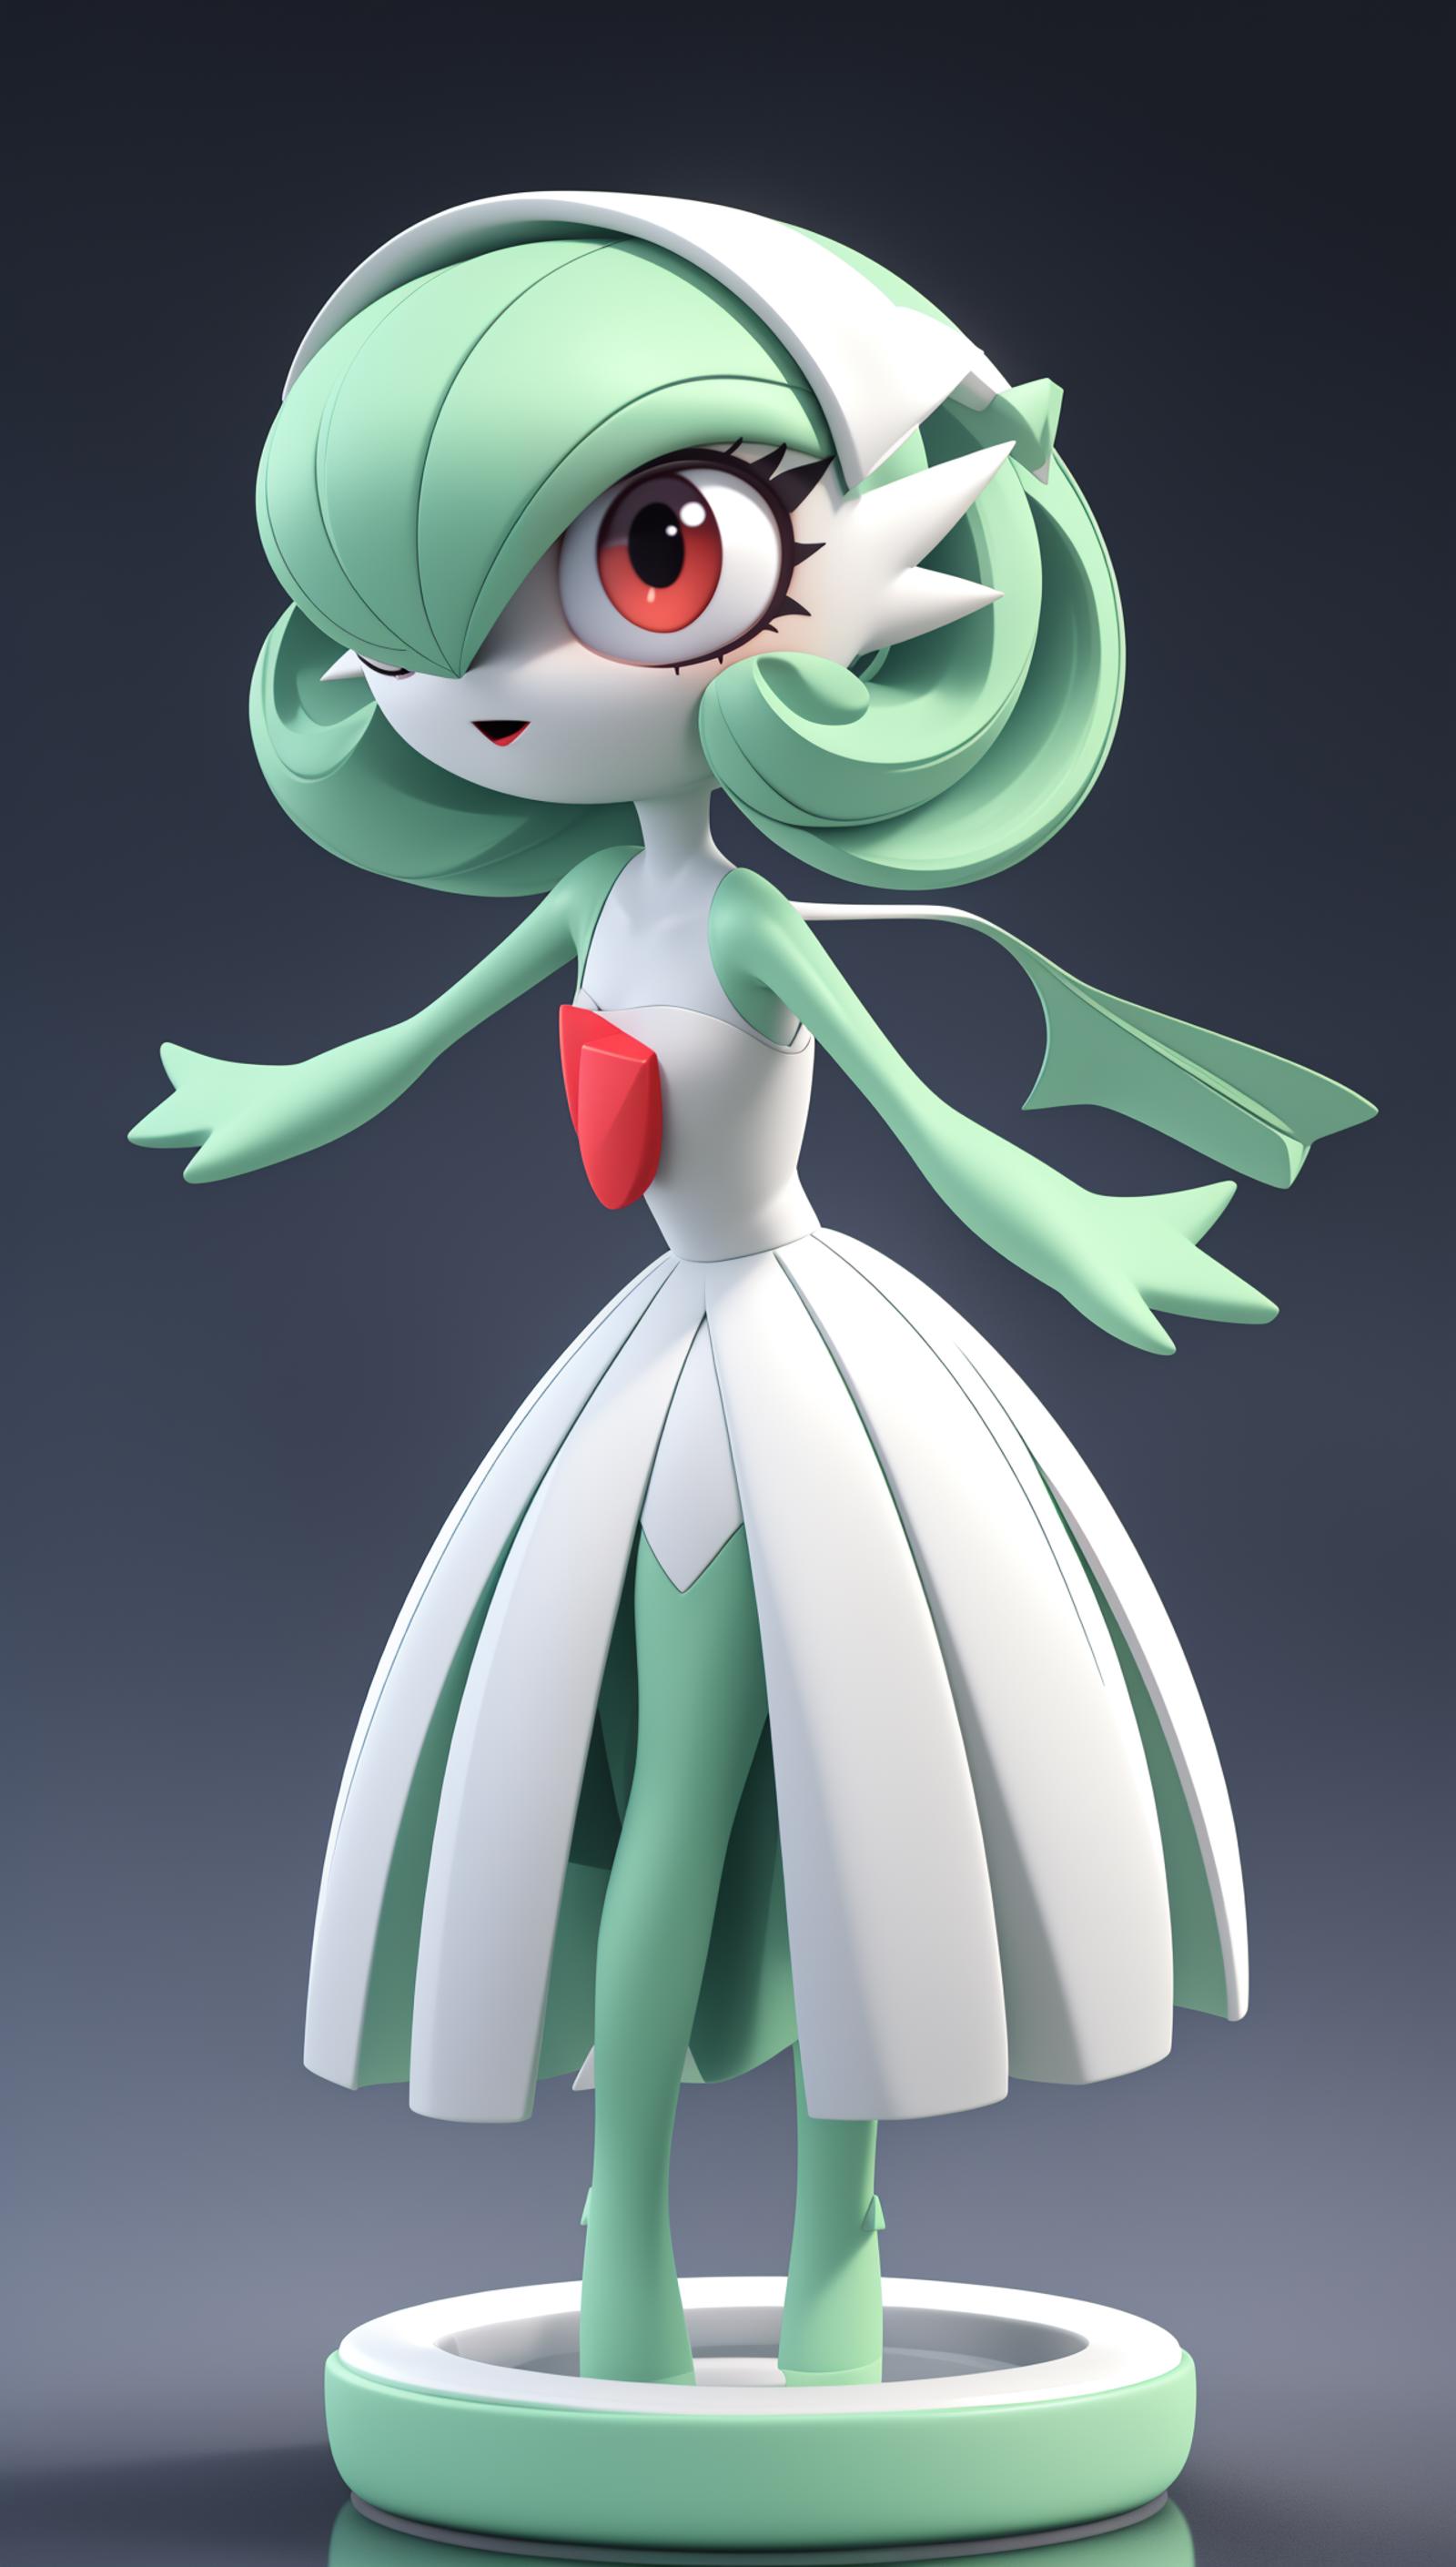 A green and white cartoon character wearing a white dress with a red heart on the front.